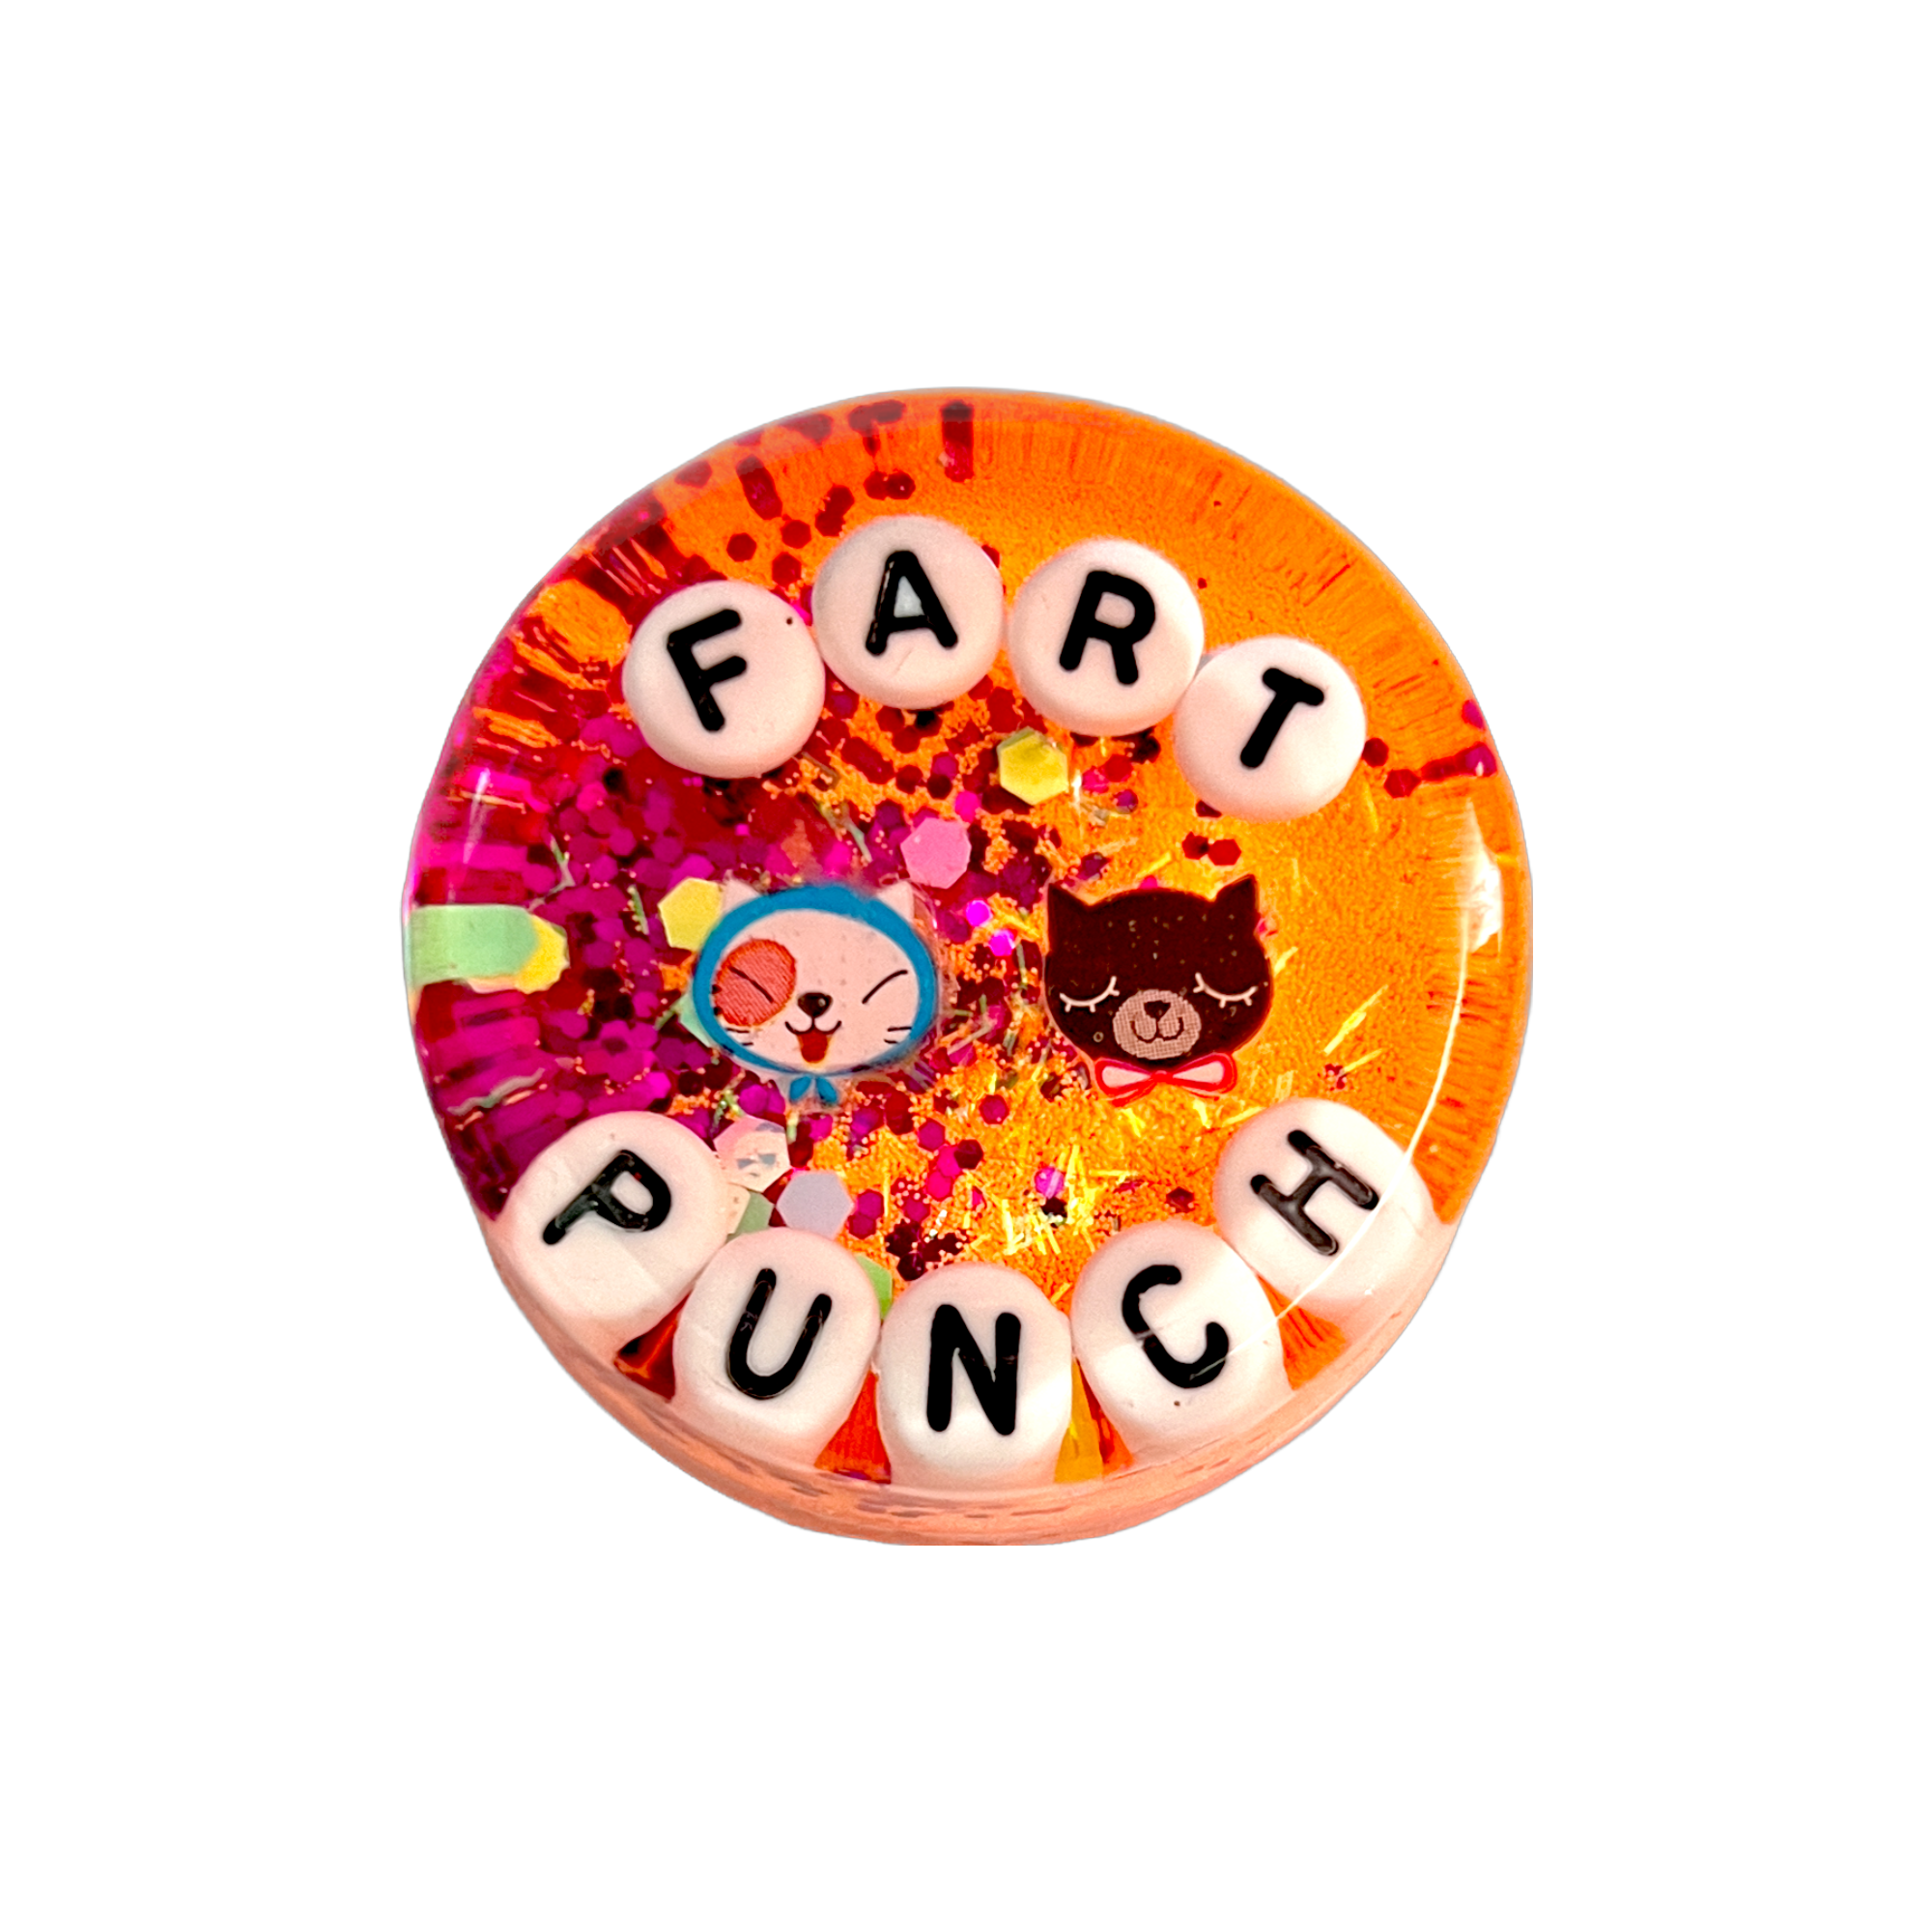 Fart Punch - Shower Art - READY TO SHIP